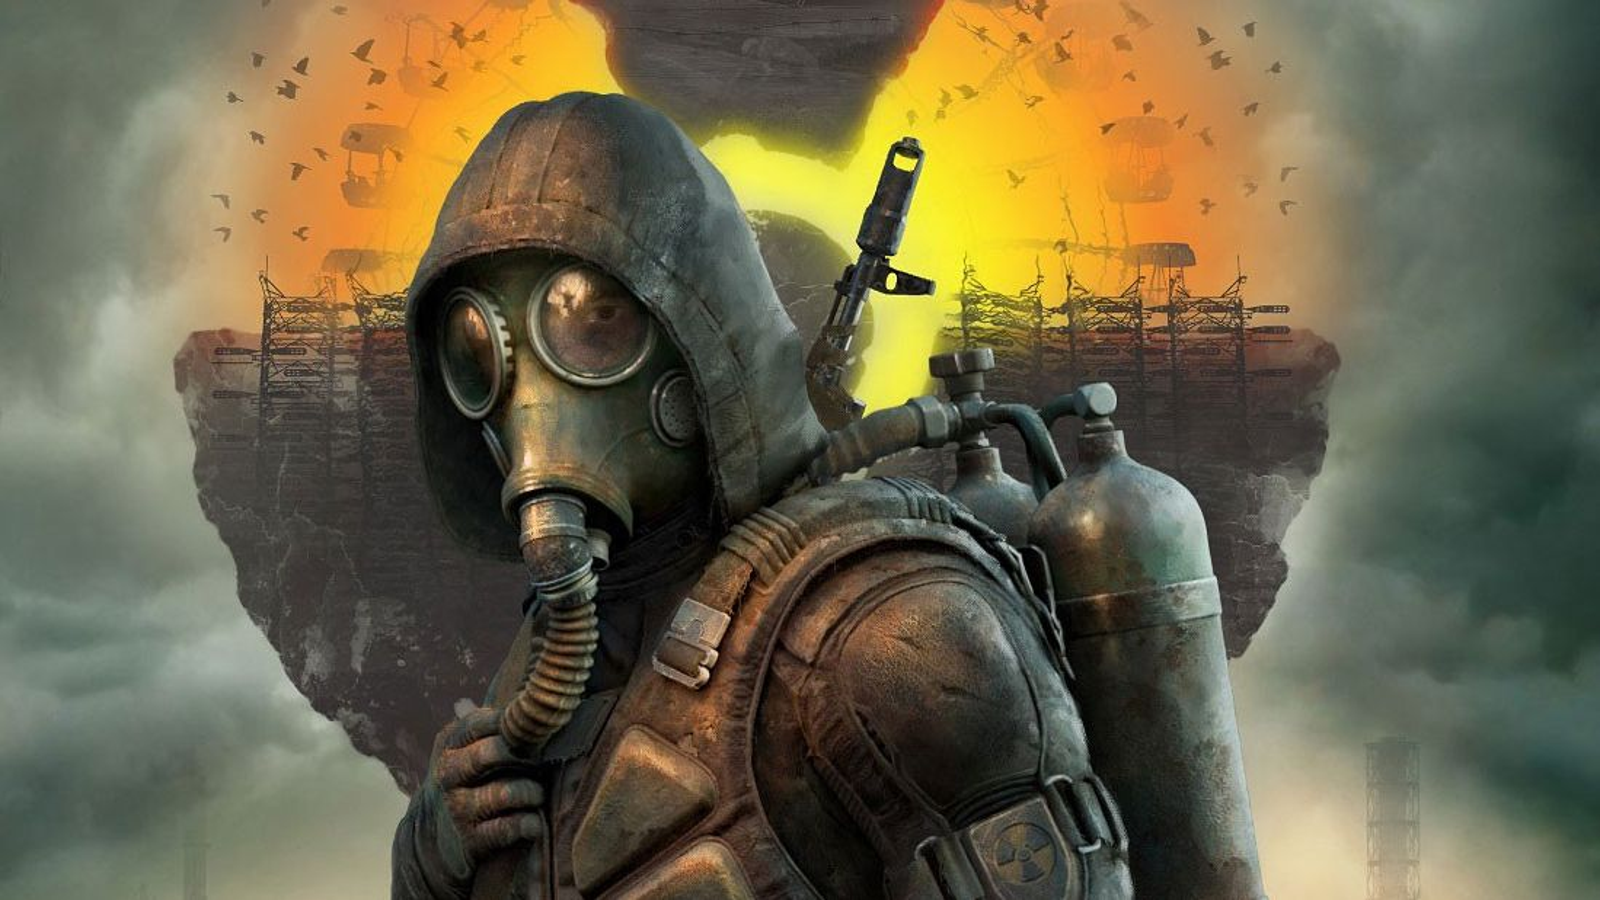 S.T.A.L.K.E.R. 2: Heart of Chornobyl - Official 'Come to Me